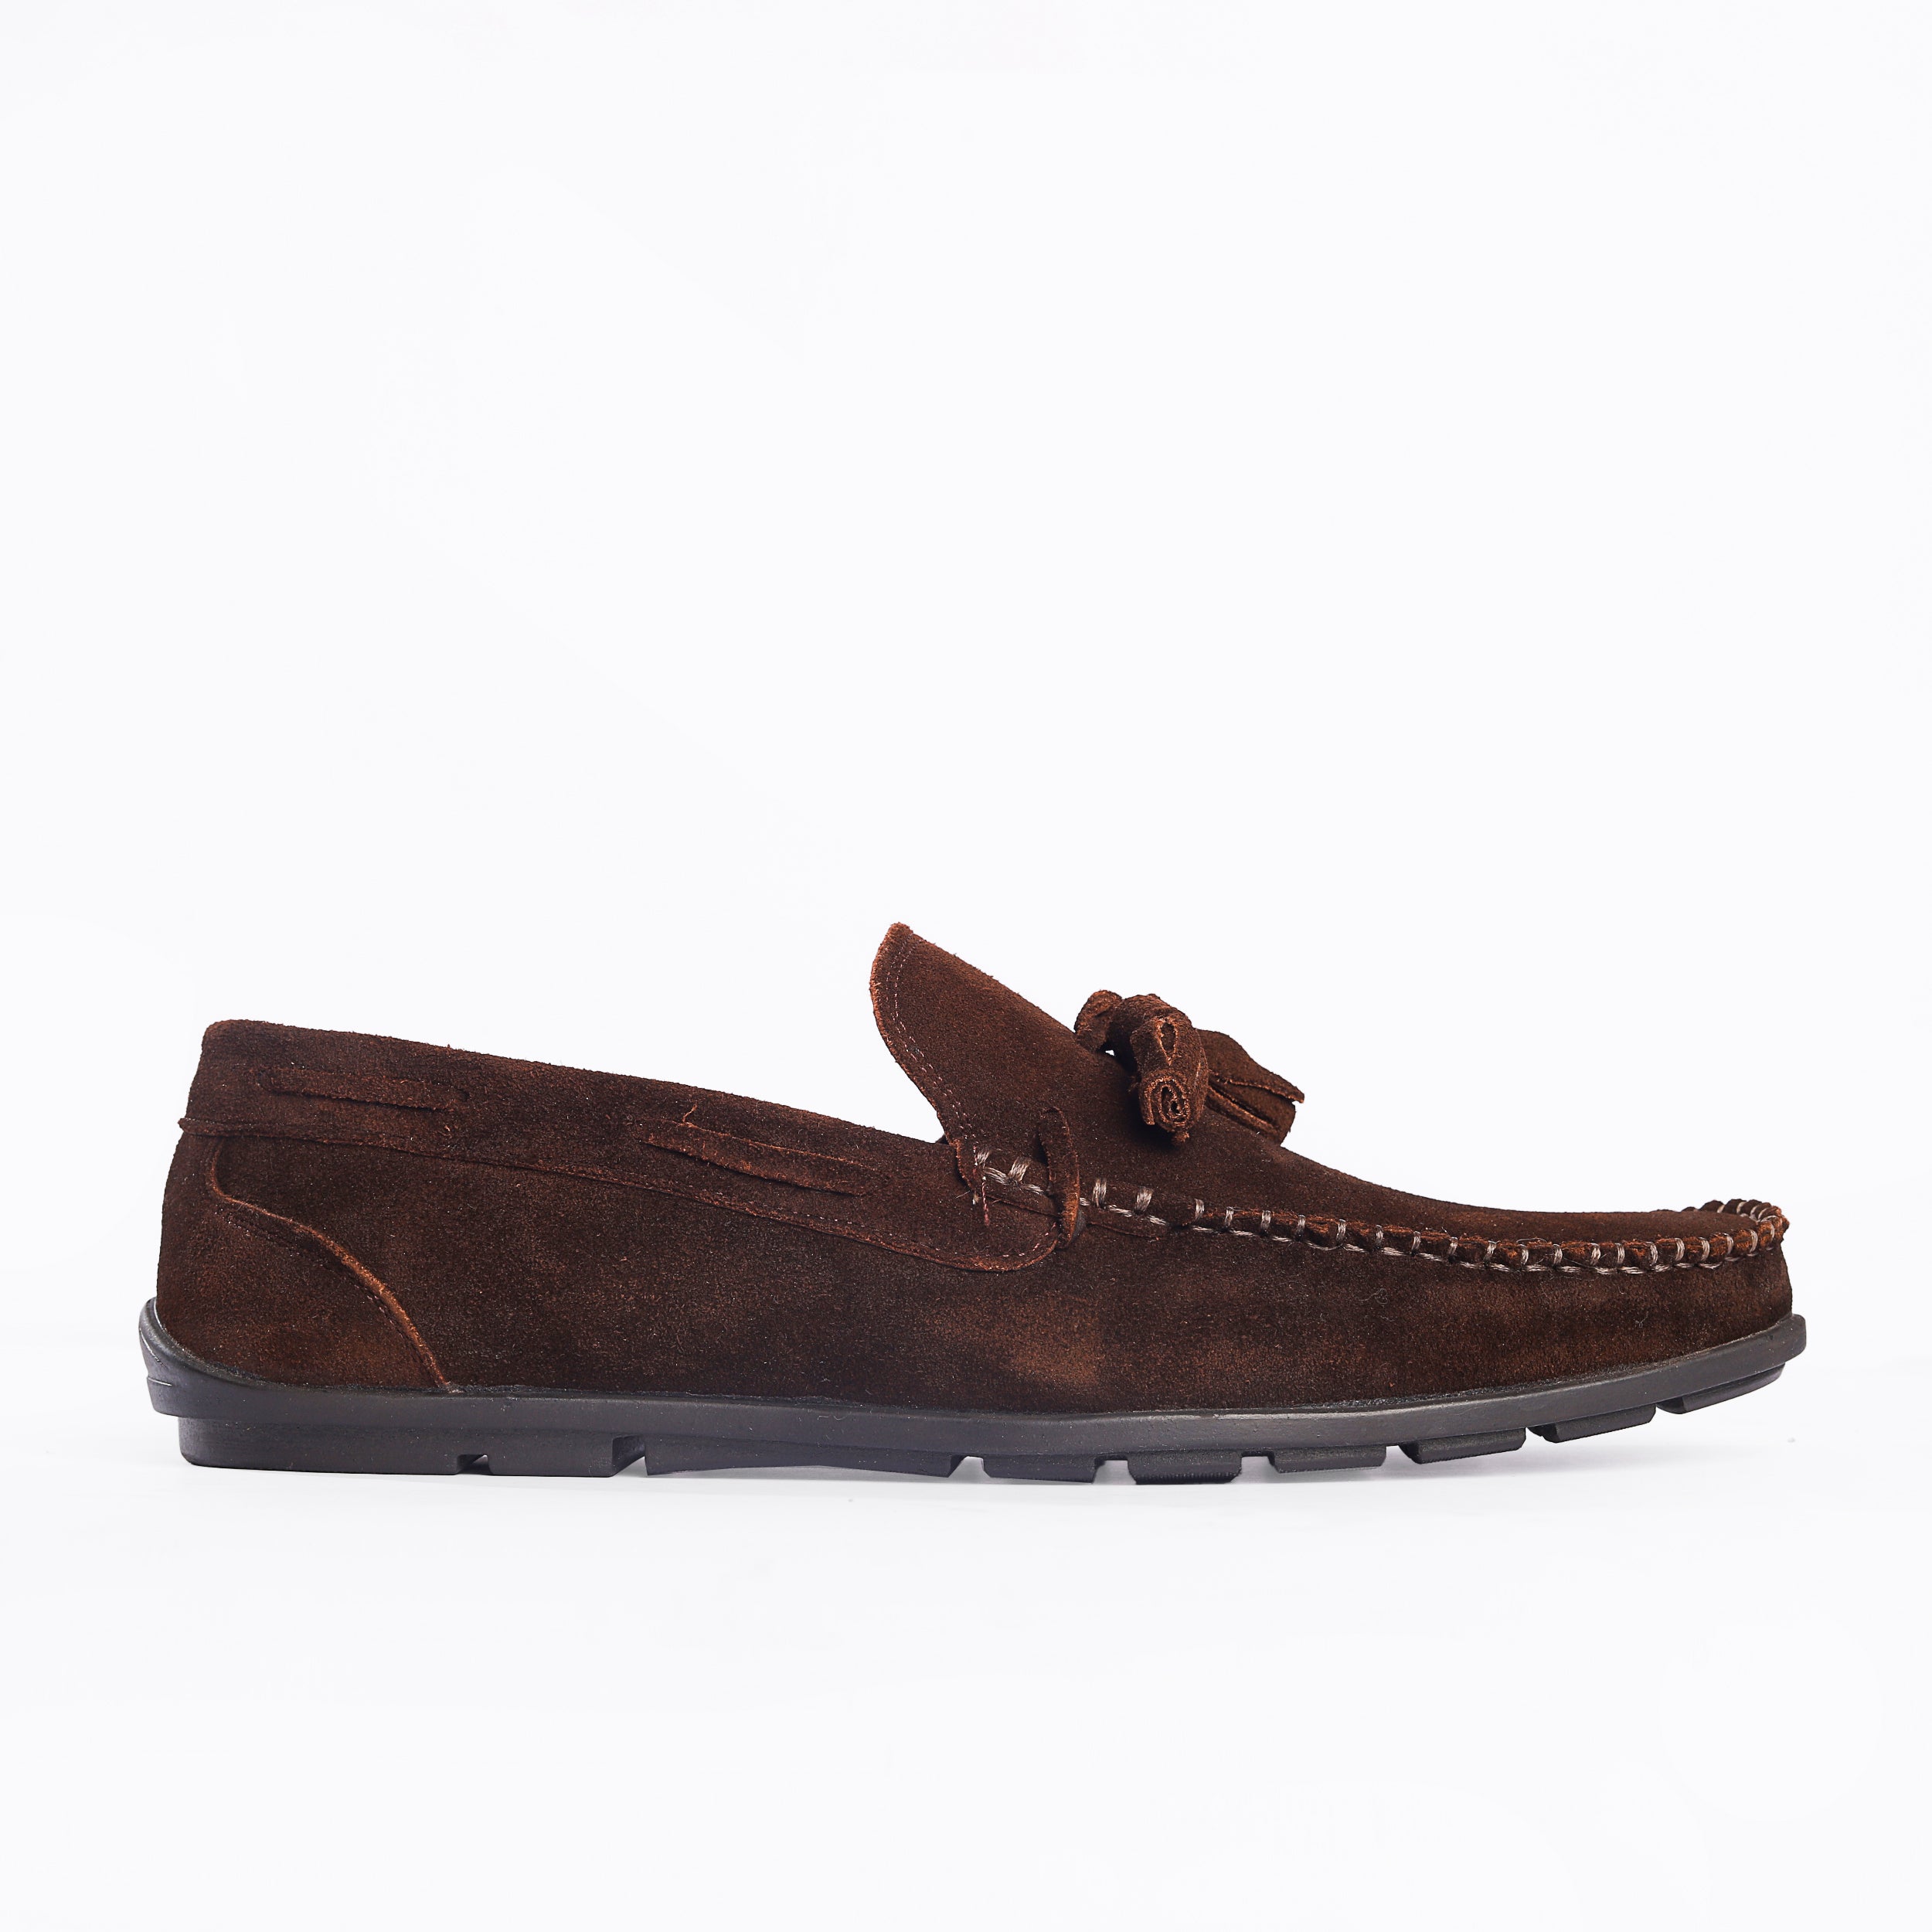 Cavallo Loafers Shoes M18